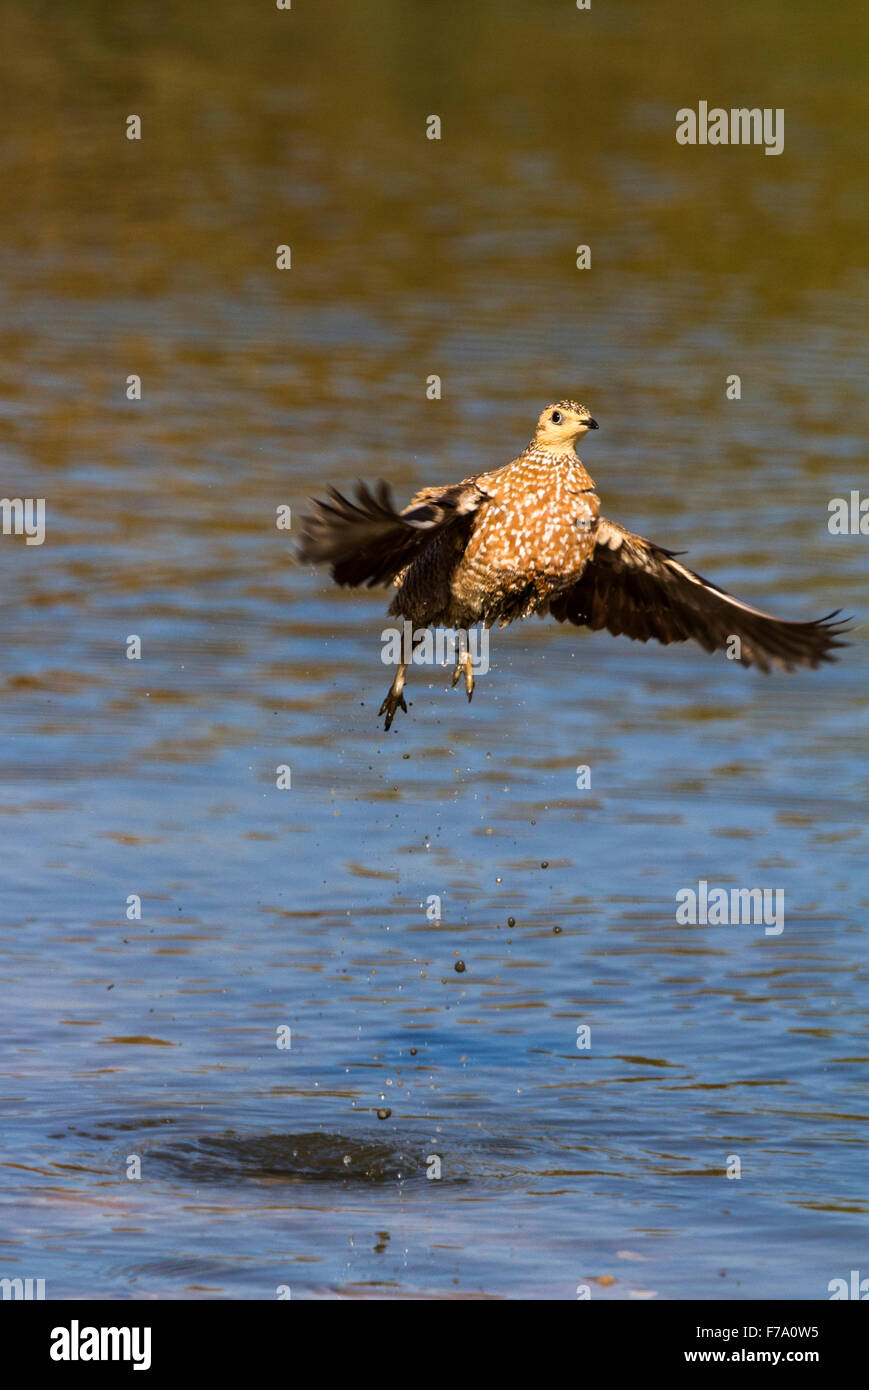 Burchell's sandgrouse (Pterocles burchelli) taking off from a waterhole with a trail of water droplets Stock Photo